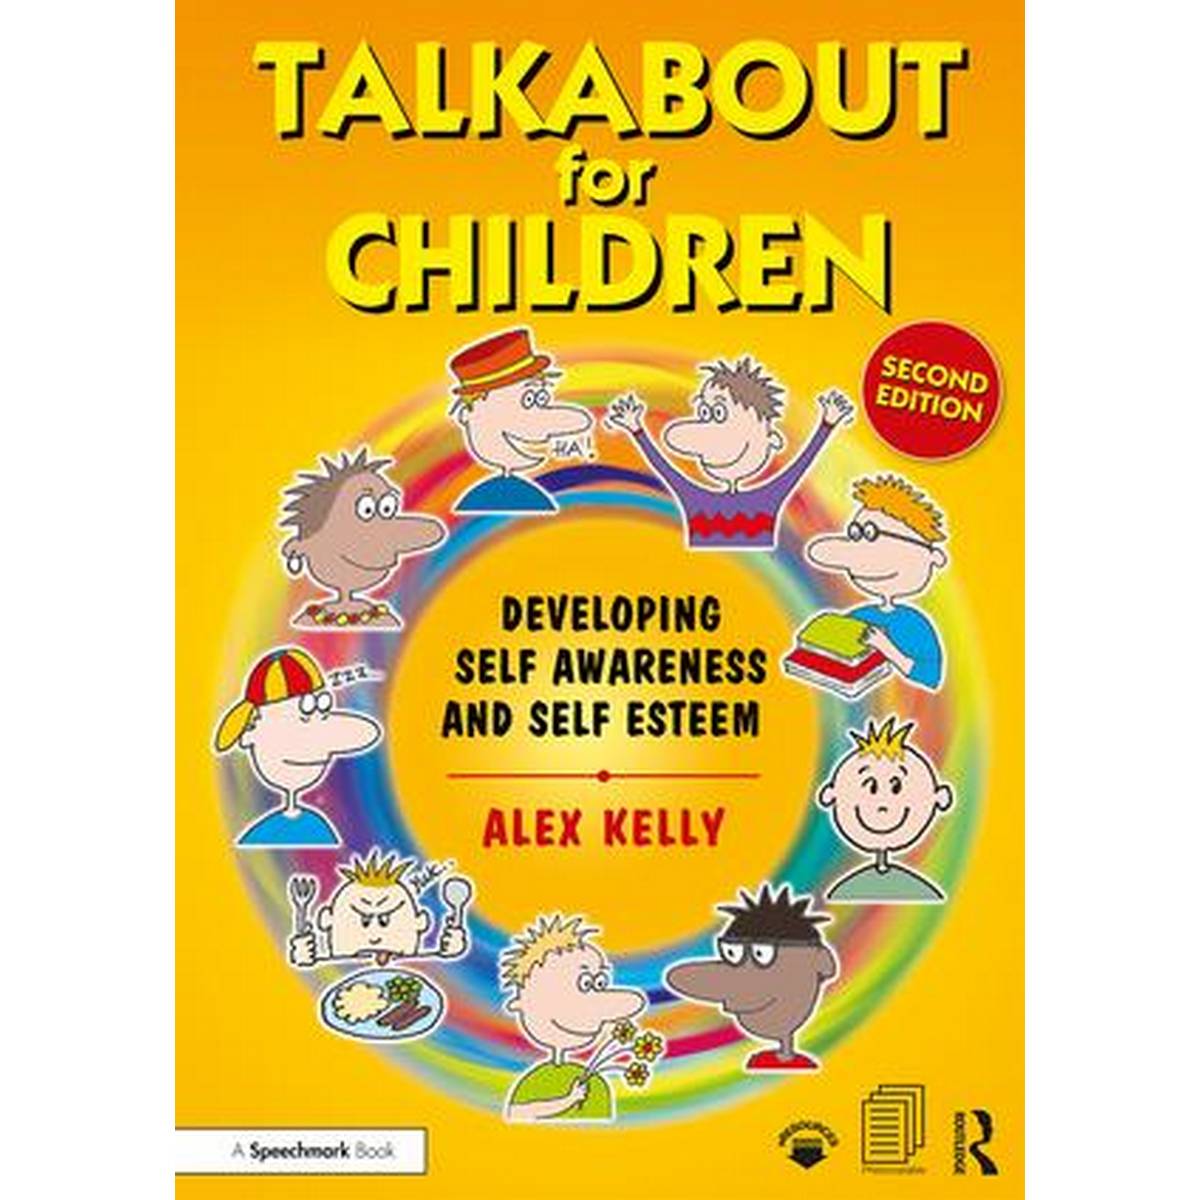 Talkabout for Children Book 1 - Developing Self Awareness and Self Esteem [2nd Edition]